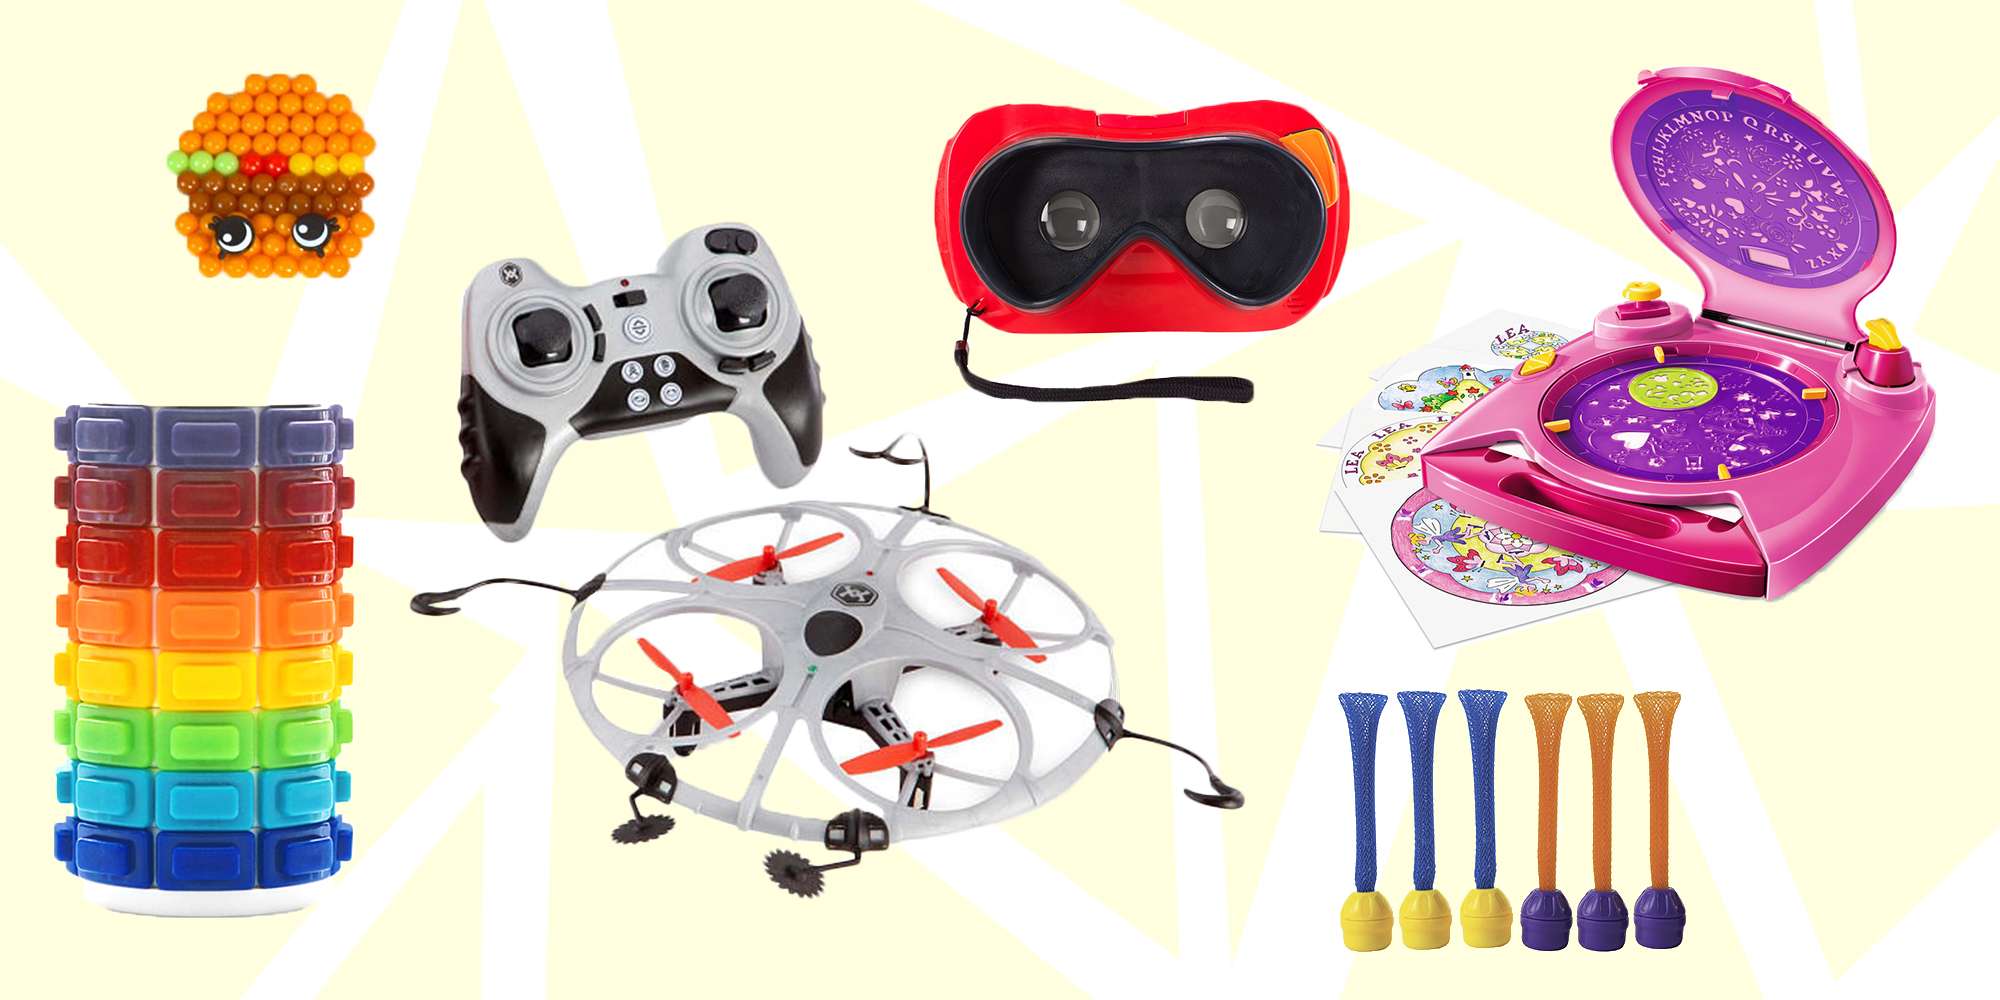 10 Best Birthday Gifts for Kids in 2018